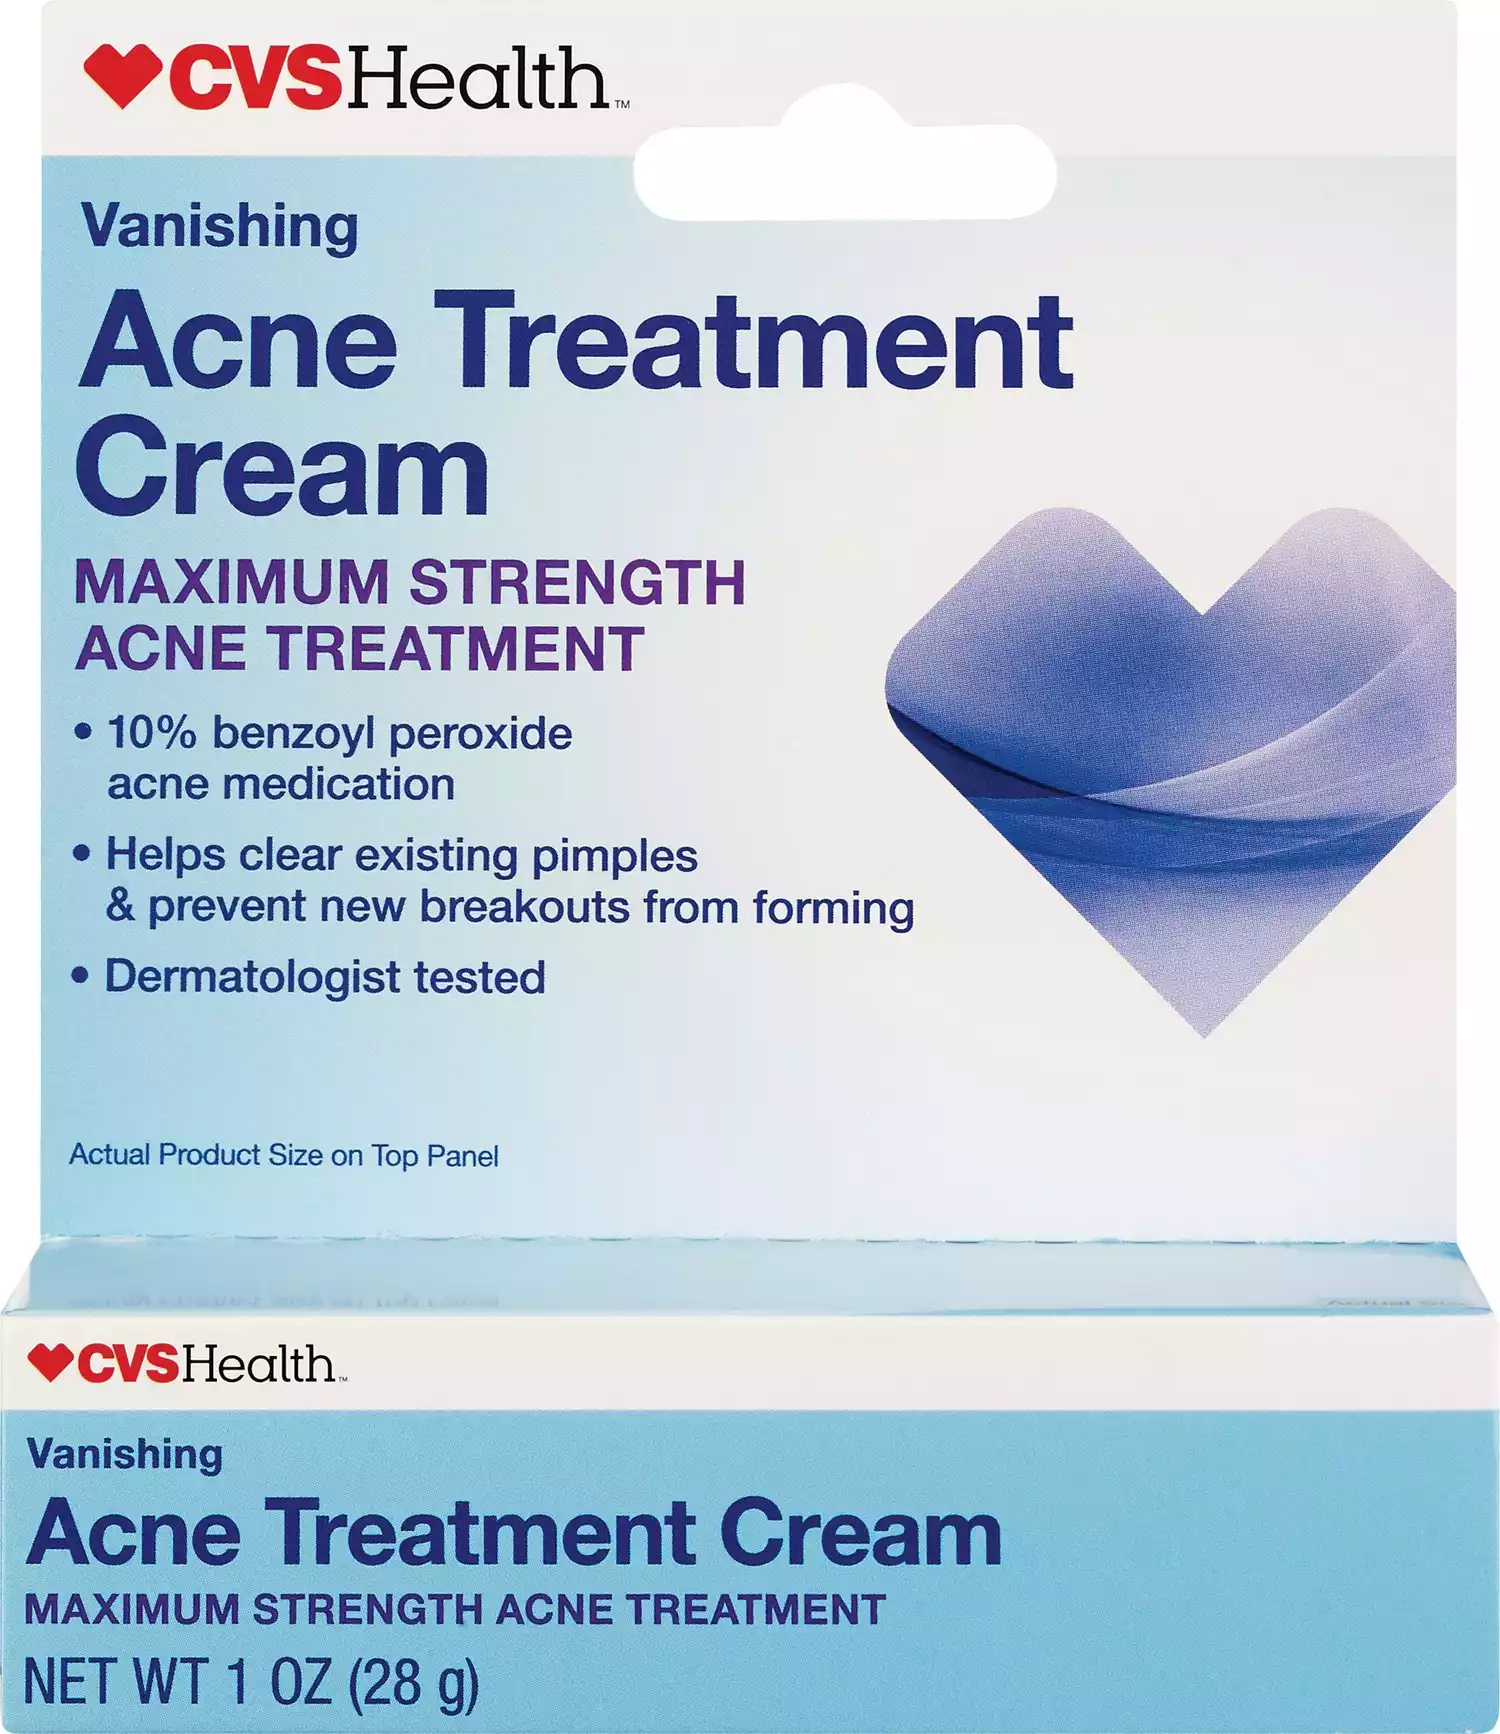 The Best Drugstore Acne Treatments: CVS Health Acne Treatment Cream With 10% Benzoyl Peroxide